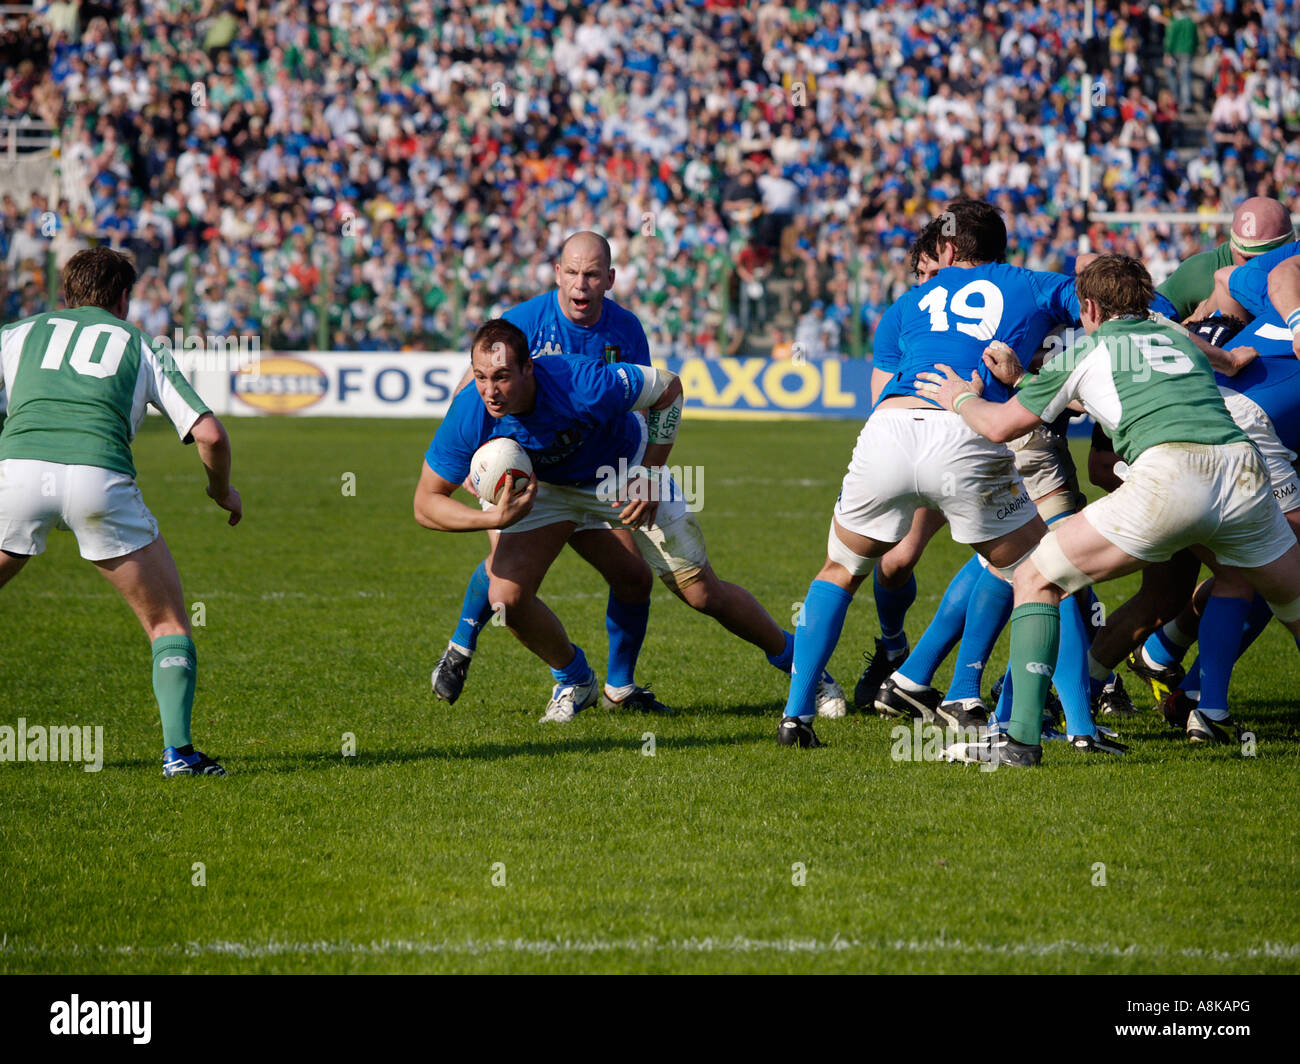 Sergio Parisse confronts Brian O'Driscoll during Italy v Ireland rugby match Stock Photo